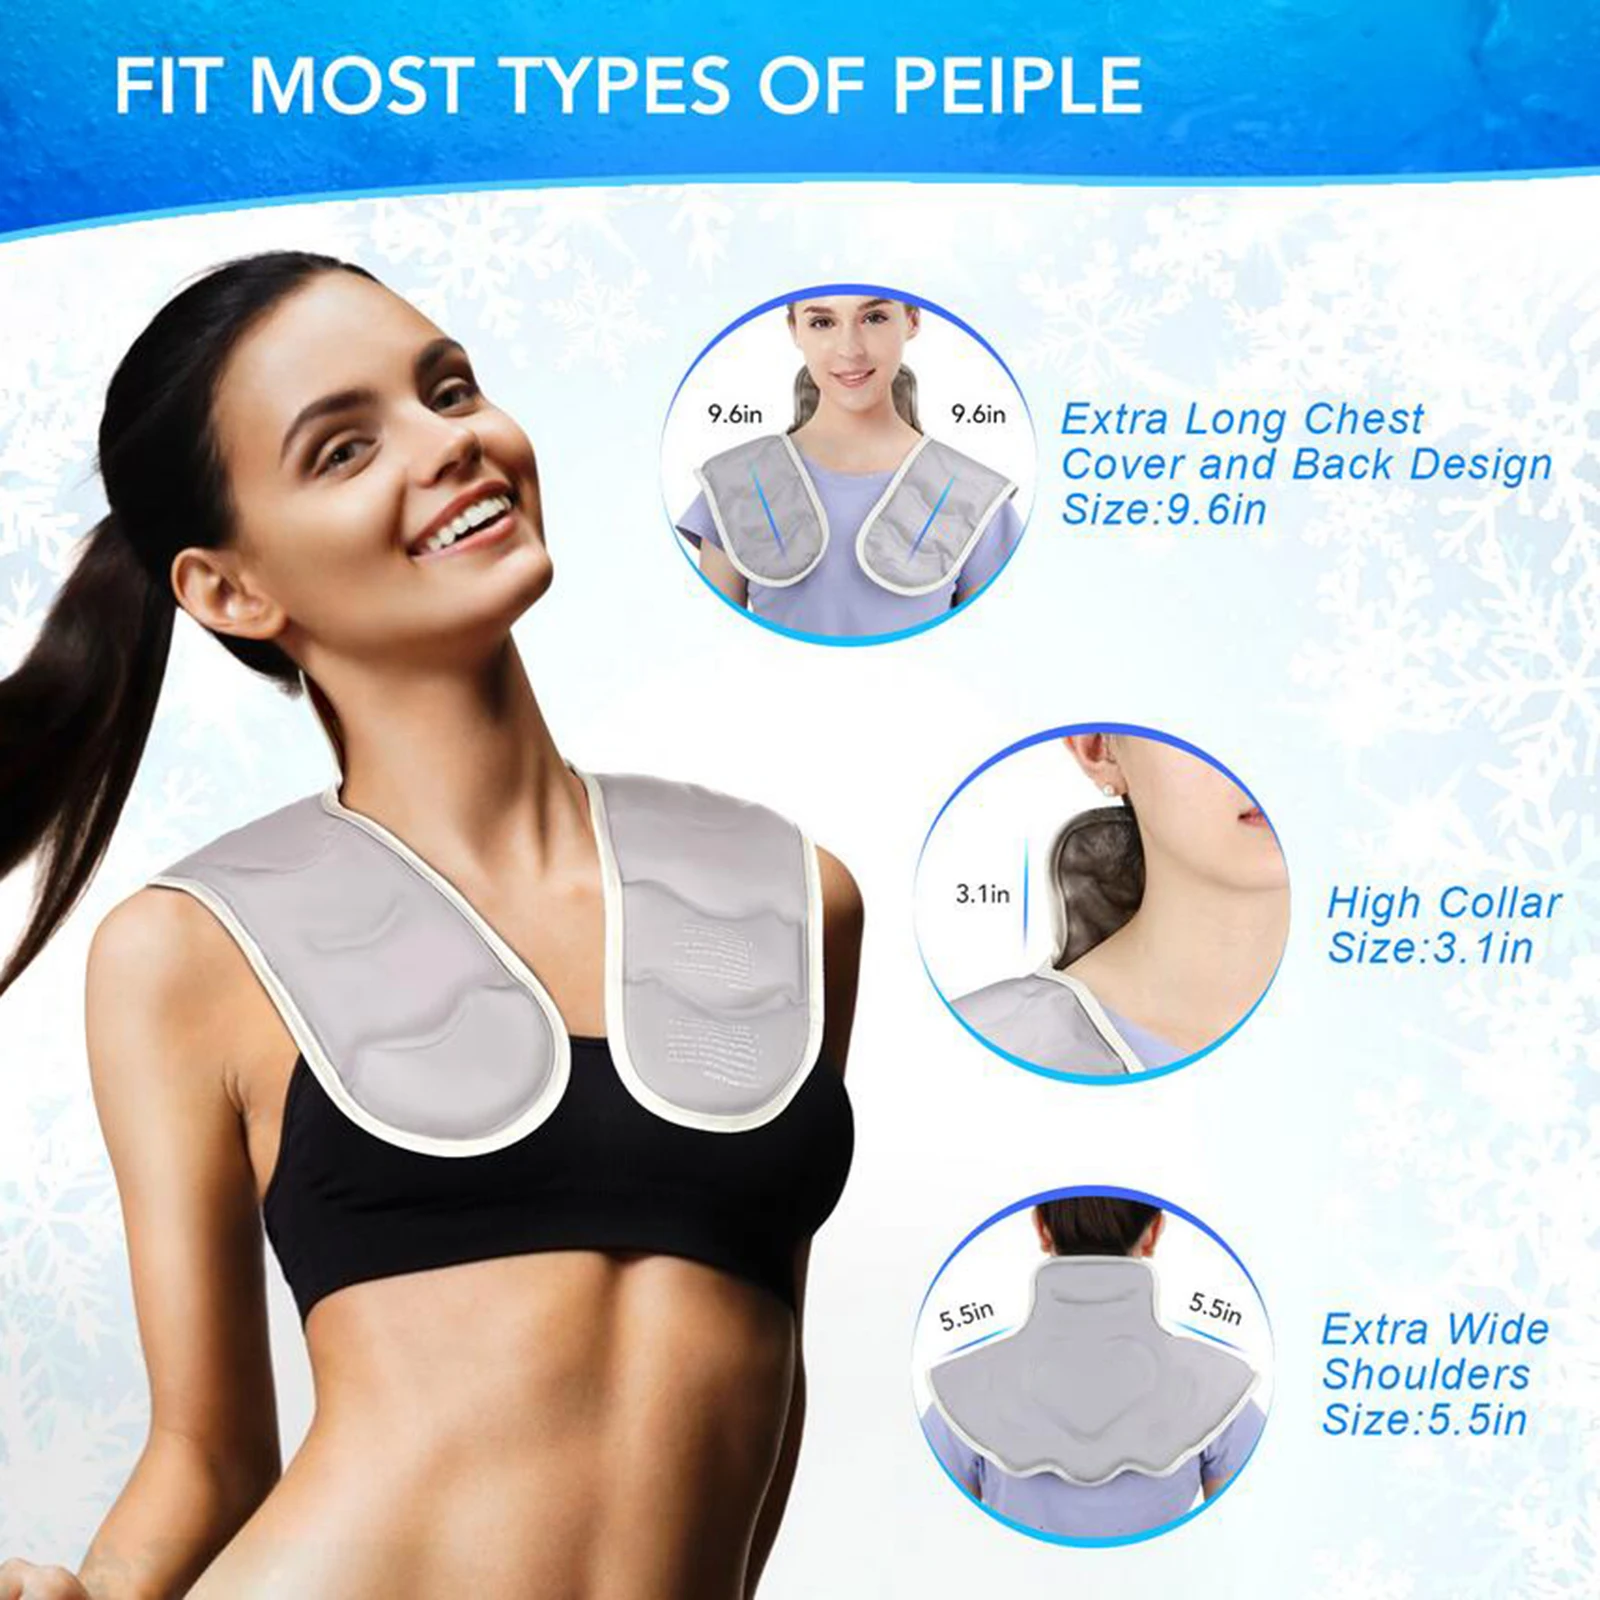 Hot & Ice Gel Ice Pack Wrap for Neck Shoulder Pain Muscle Tension Adjustable Strap Neck Pain Injuries Cooler Pack